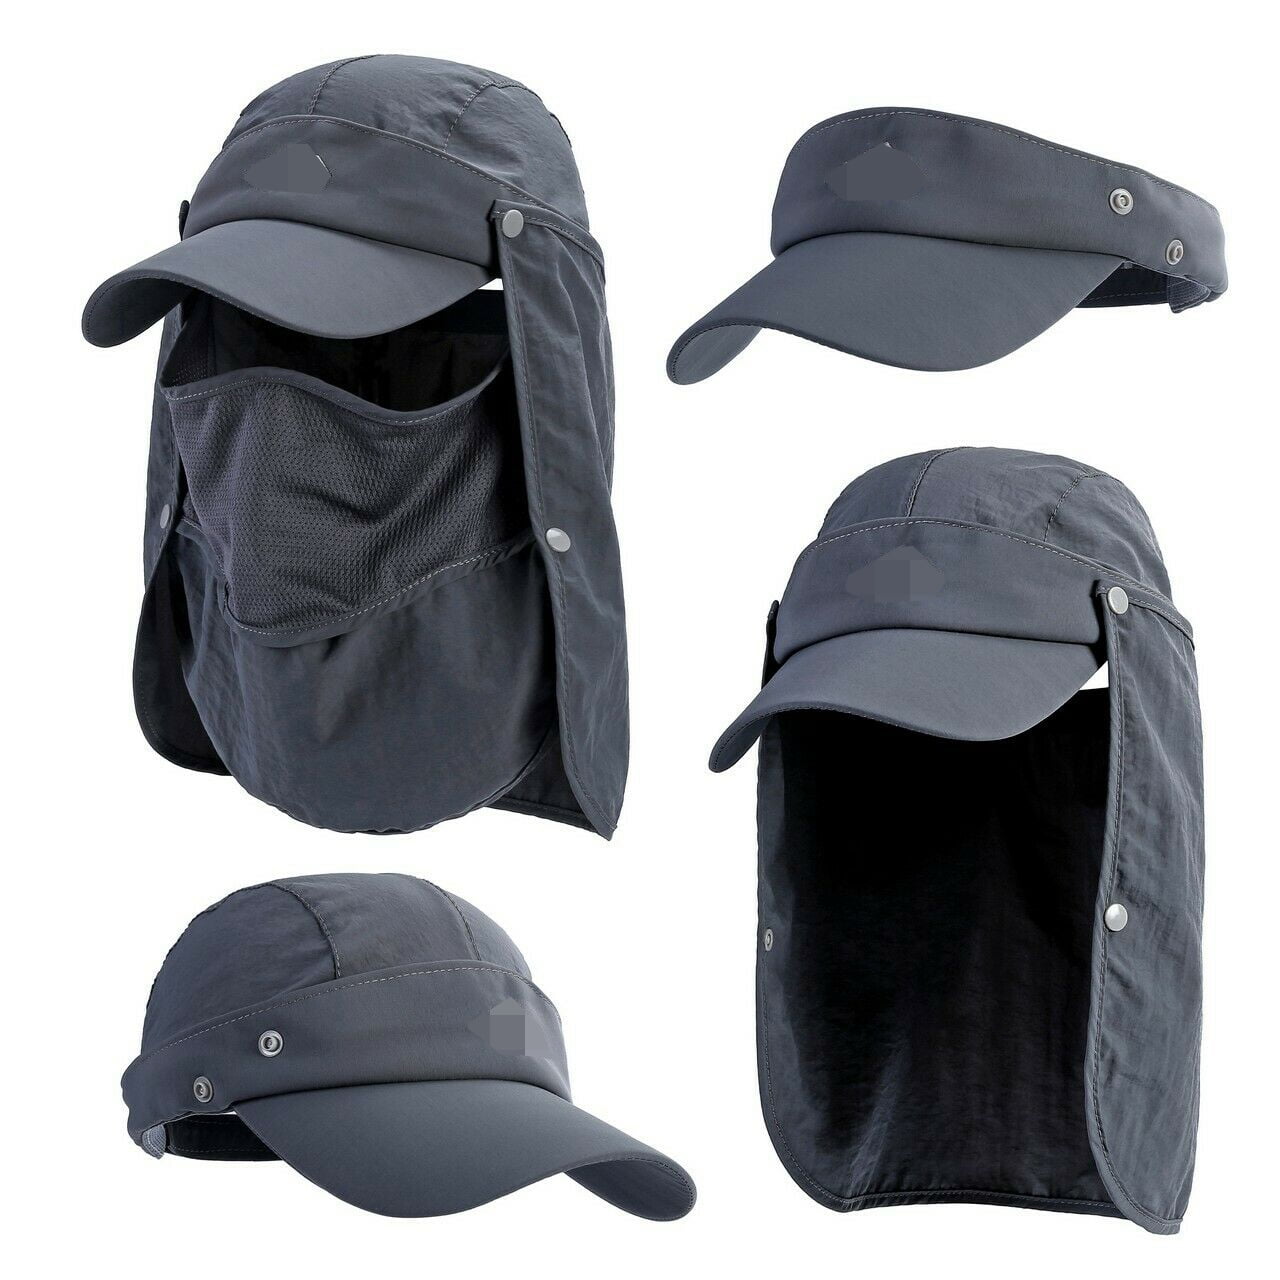 Fishing Hiking Baseball Hat Cap Neck Cover Ear Flap Outdoor UV Sun Protection